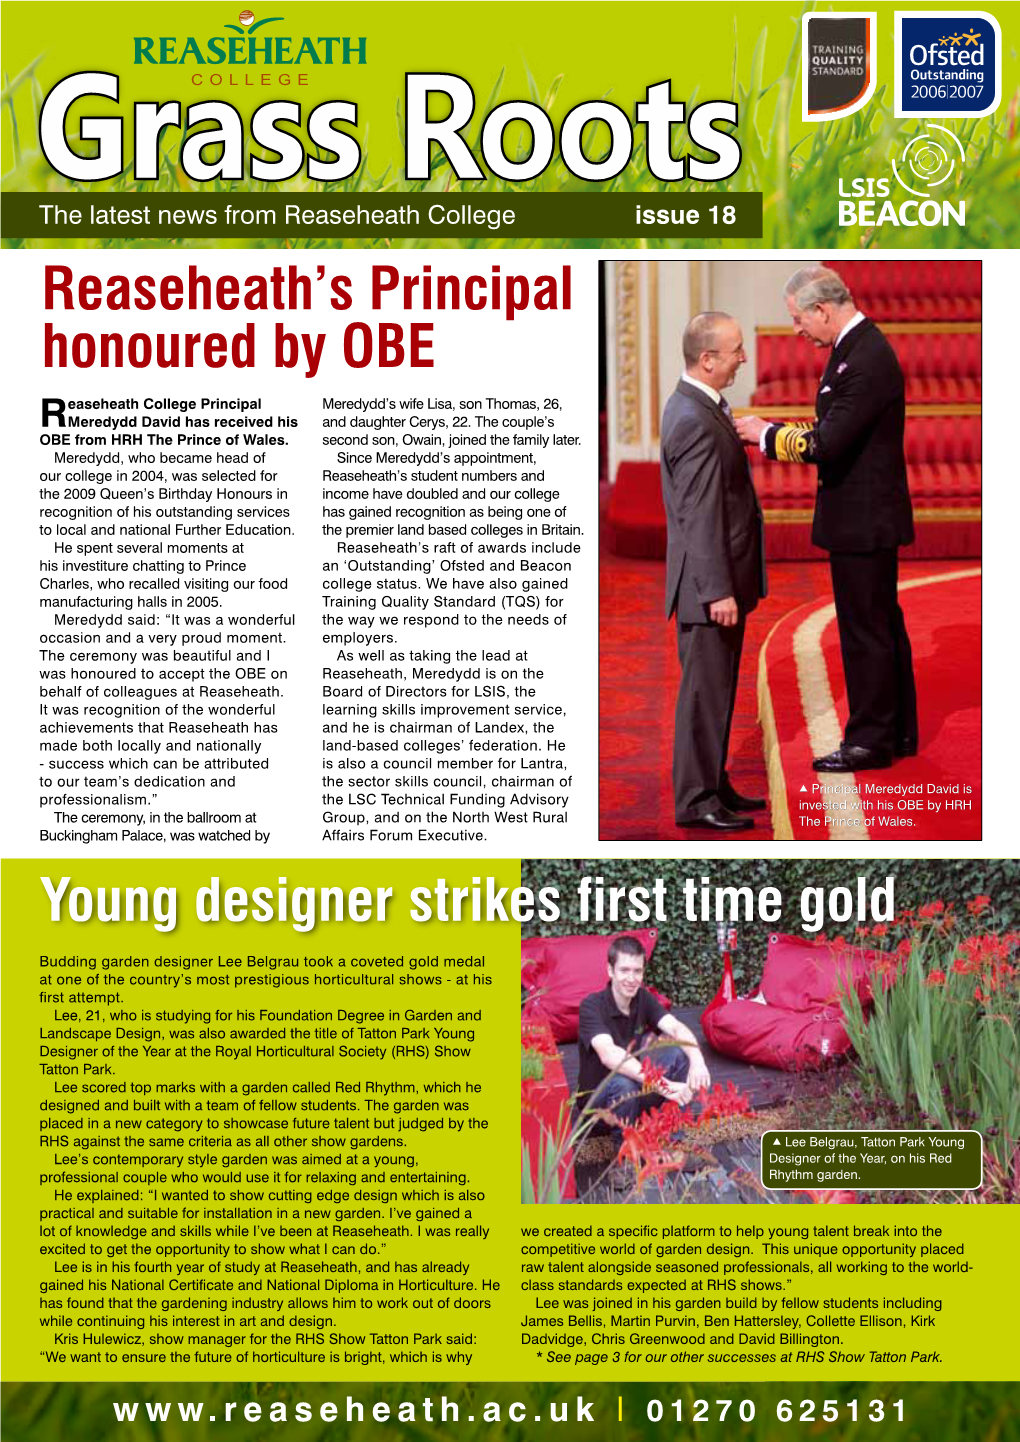 Reaseheath's Principal Honoured by OBE Young Designer Strikes First